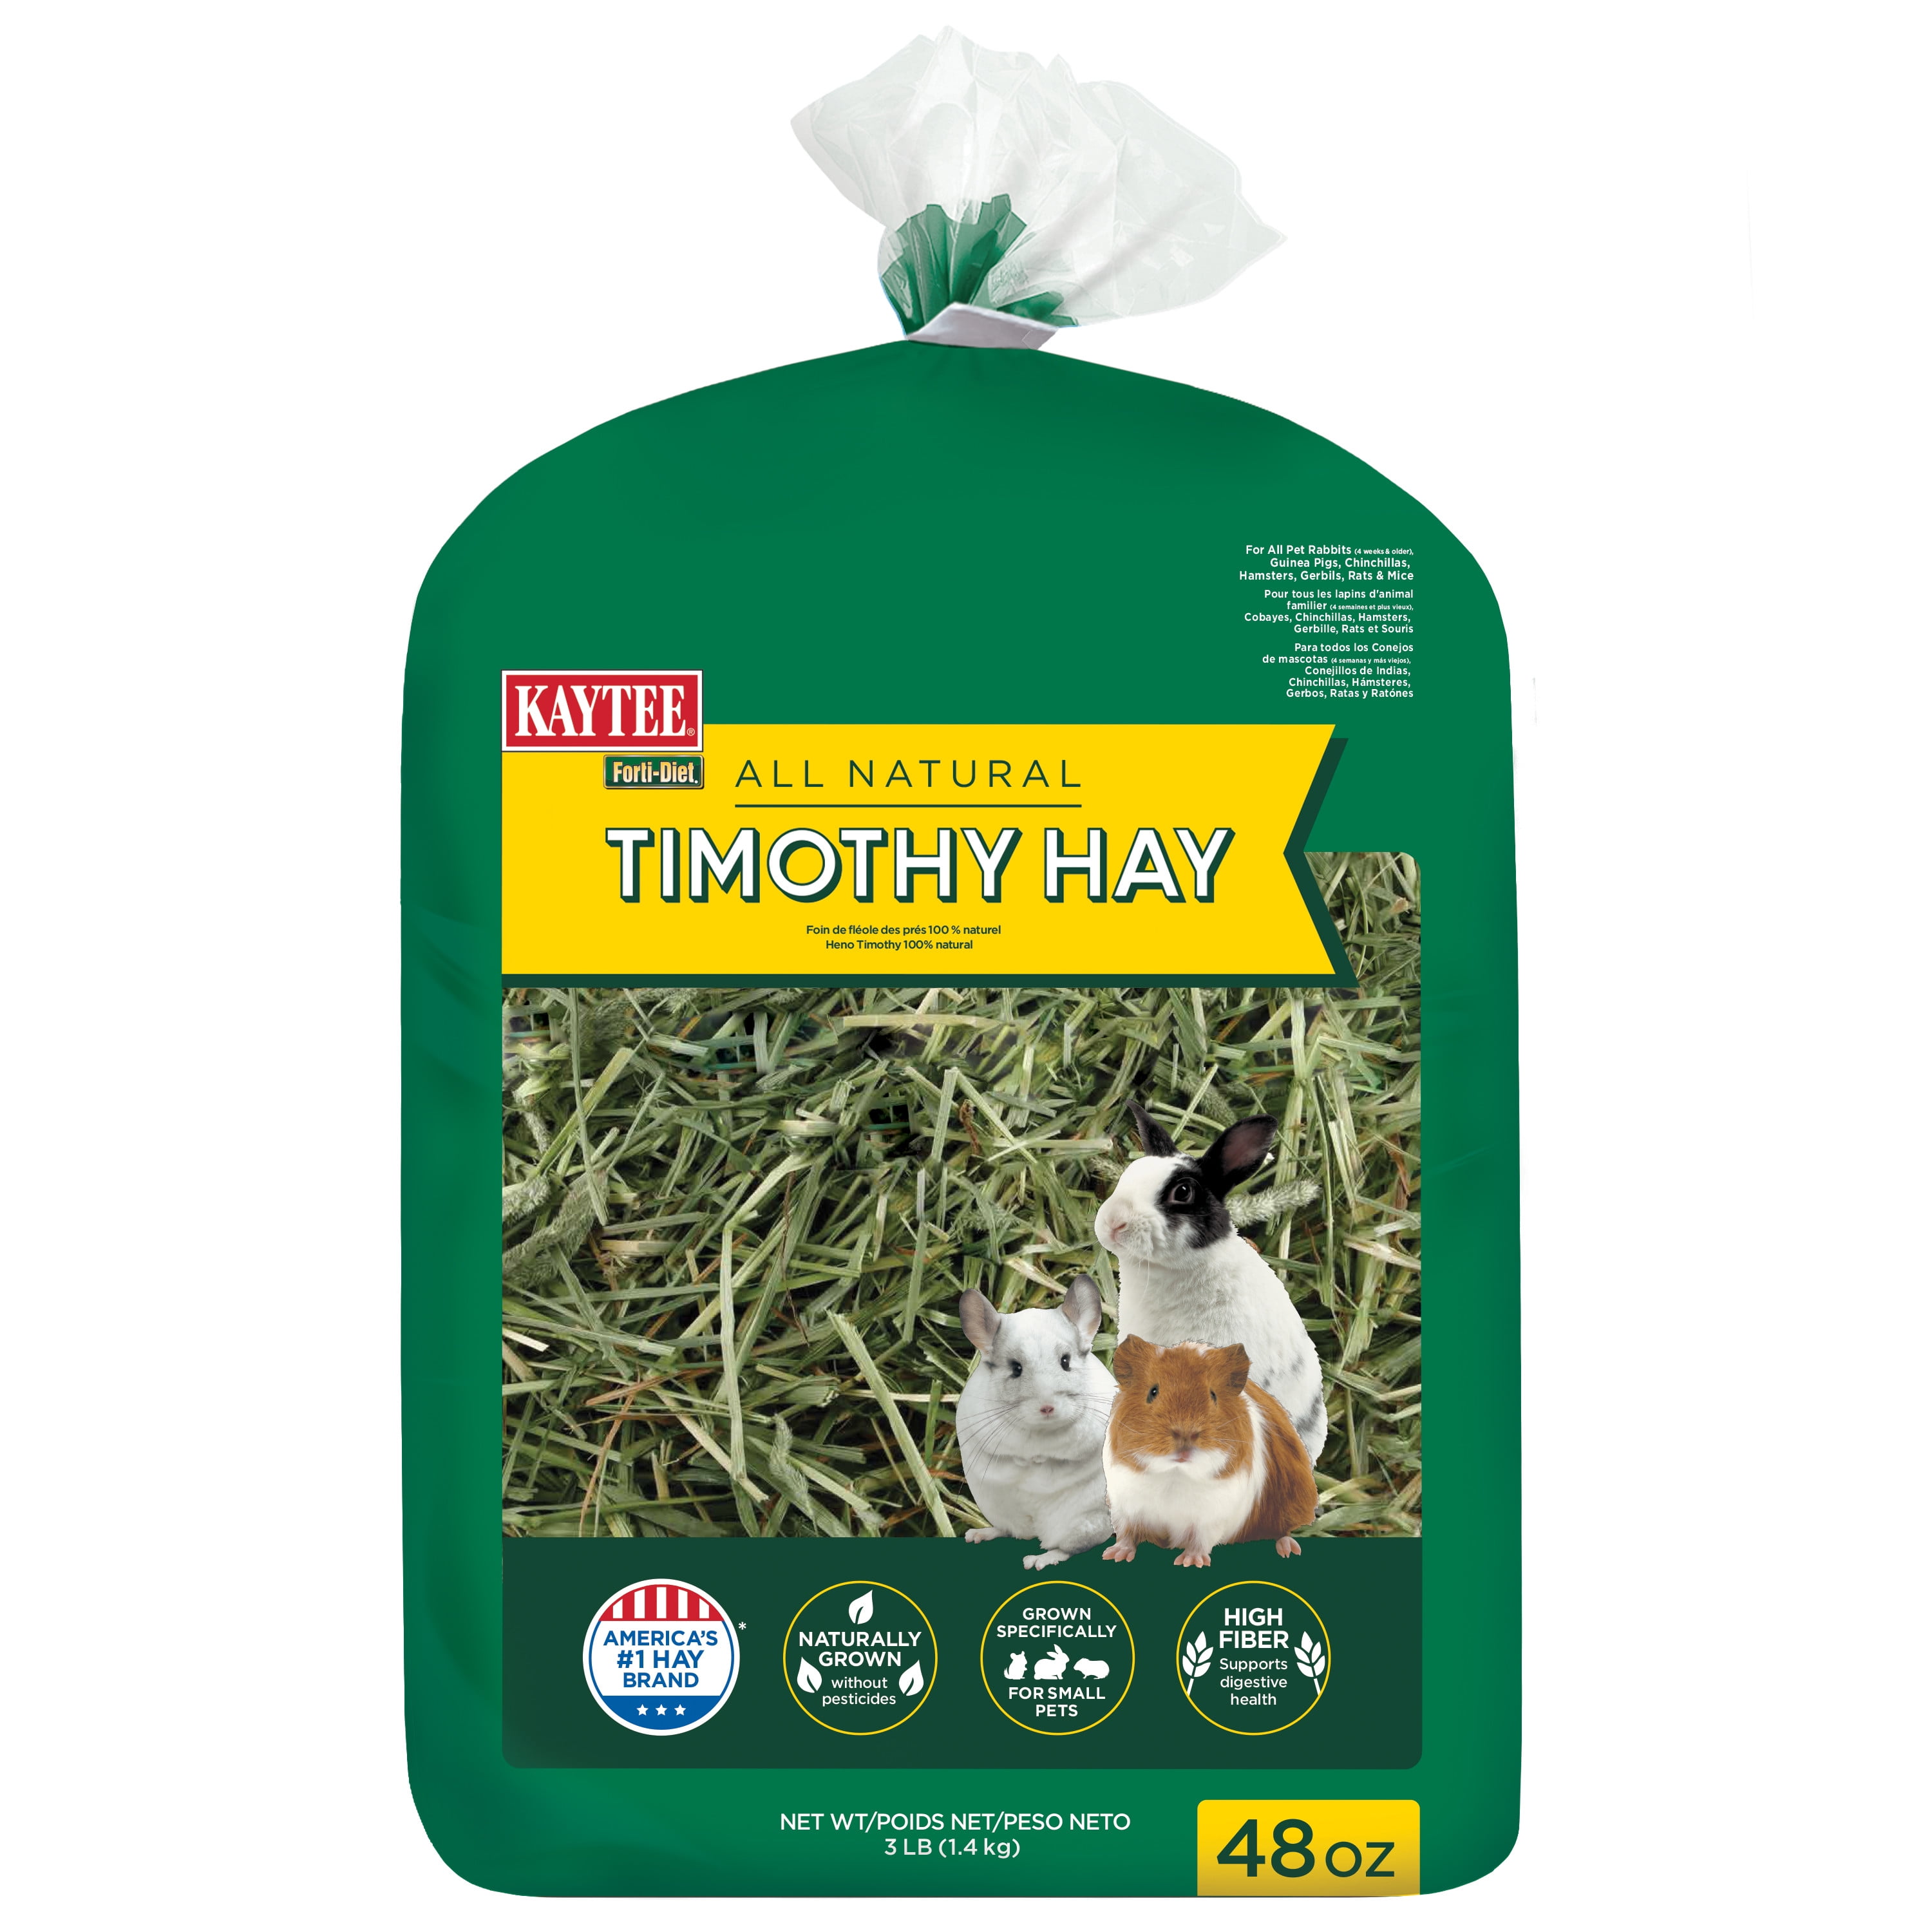 Kaytee Forti-Diet All Natural Timothy Hay , 48 ounce